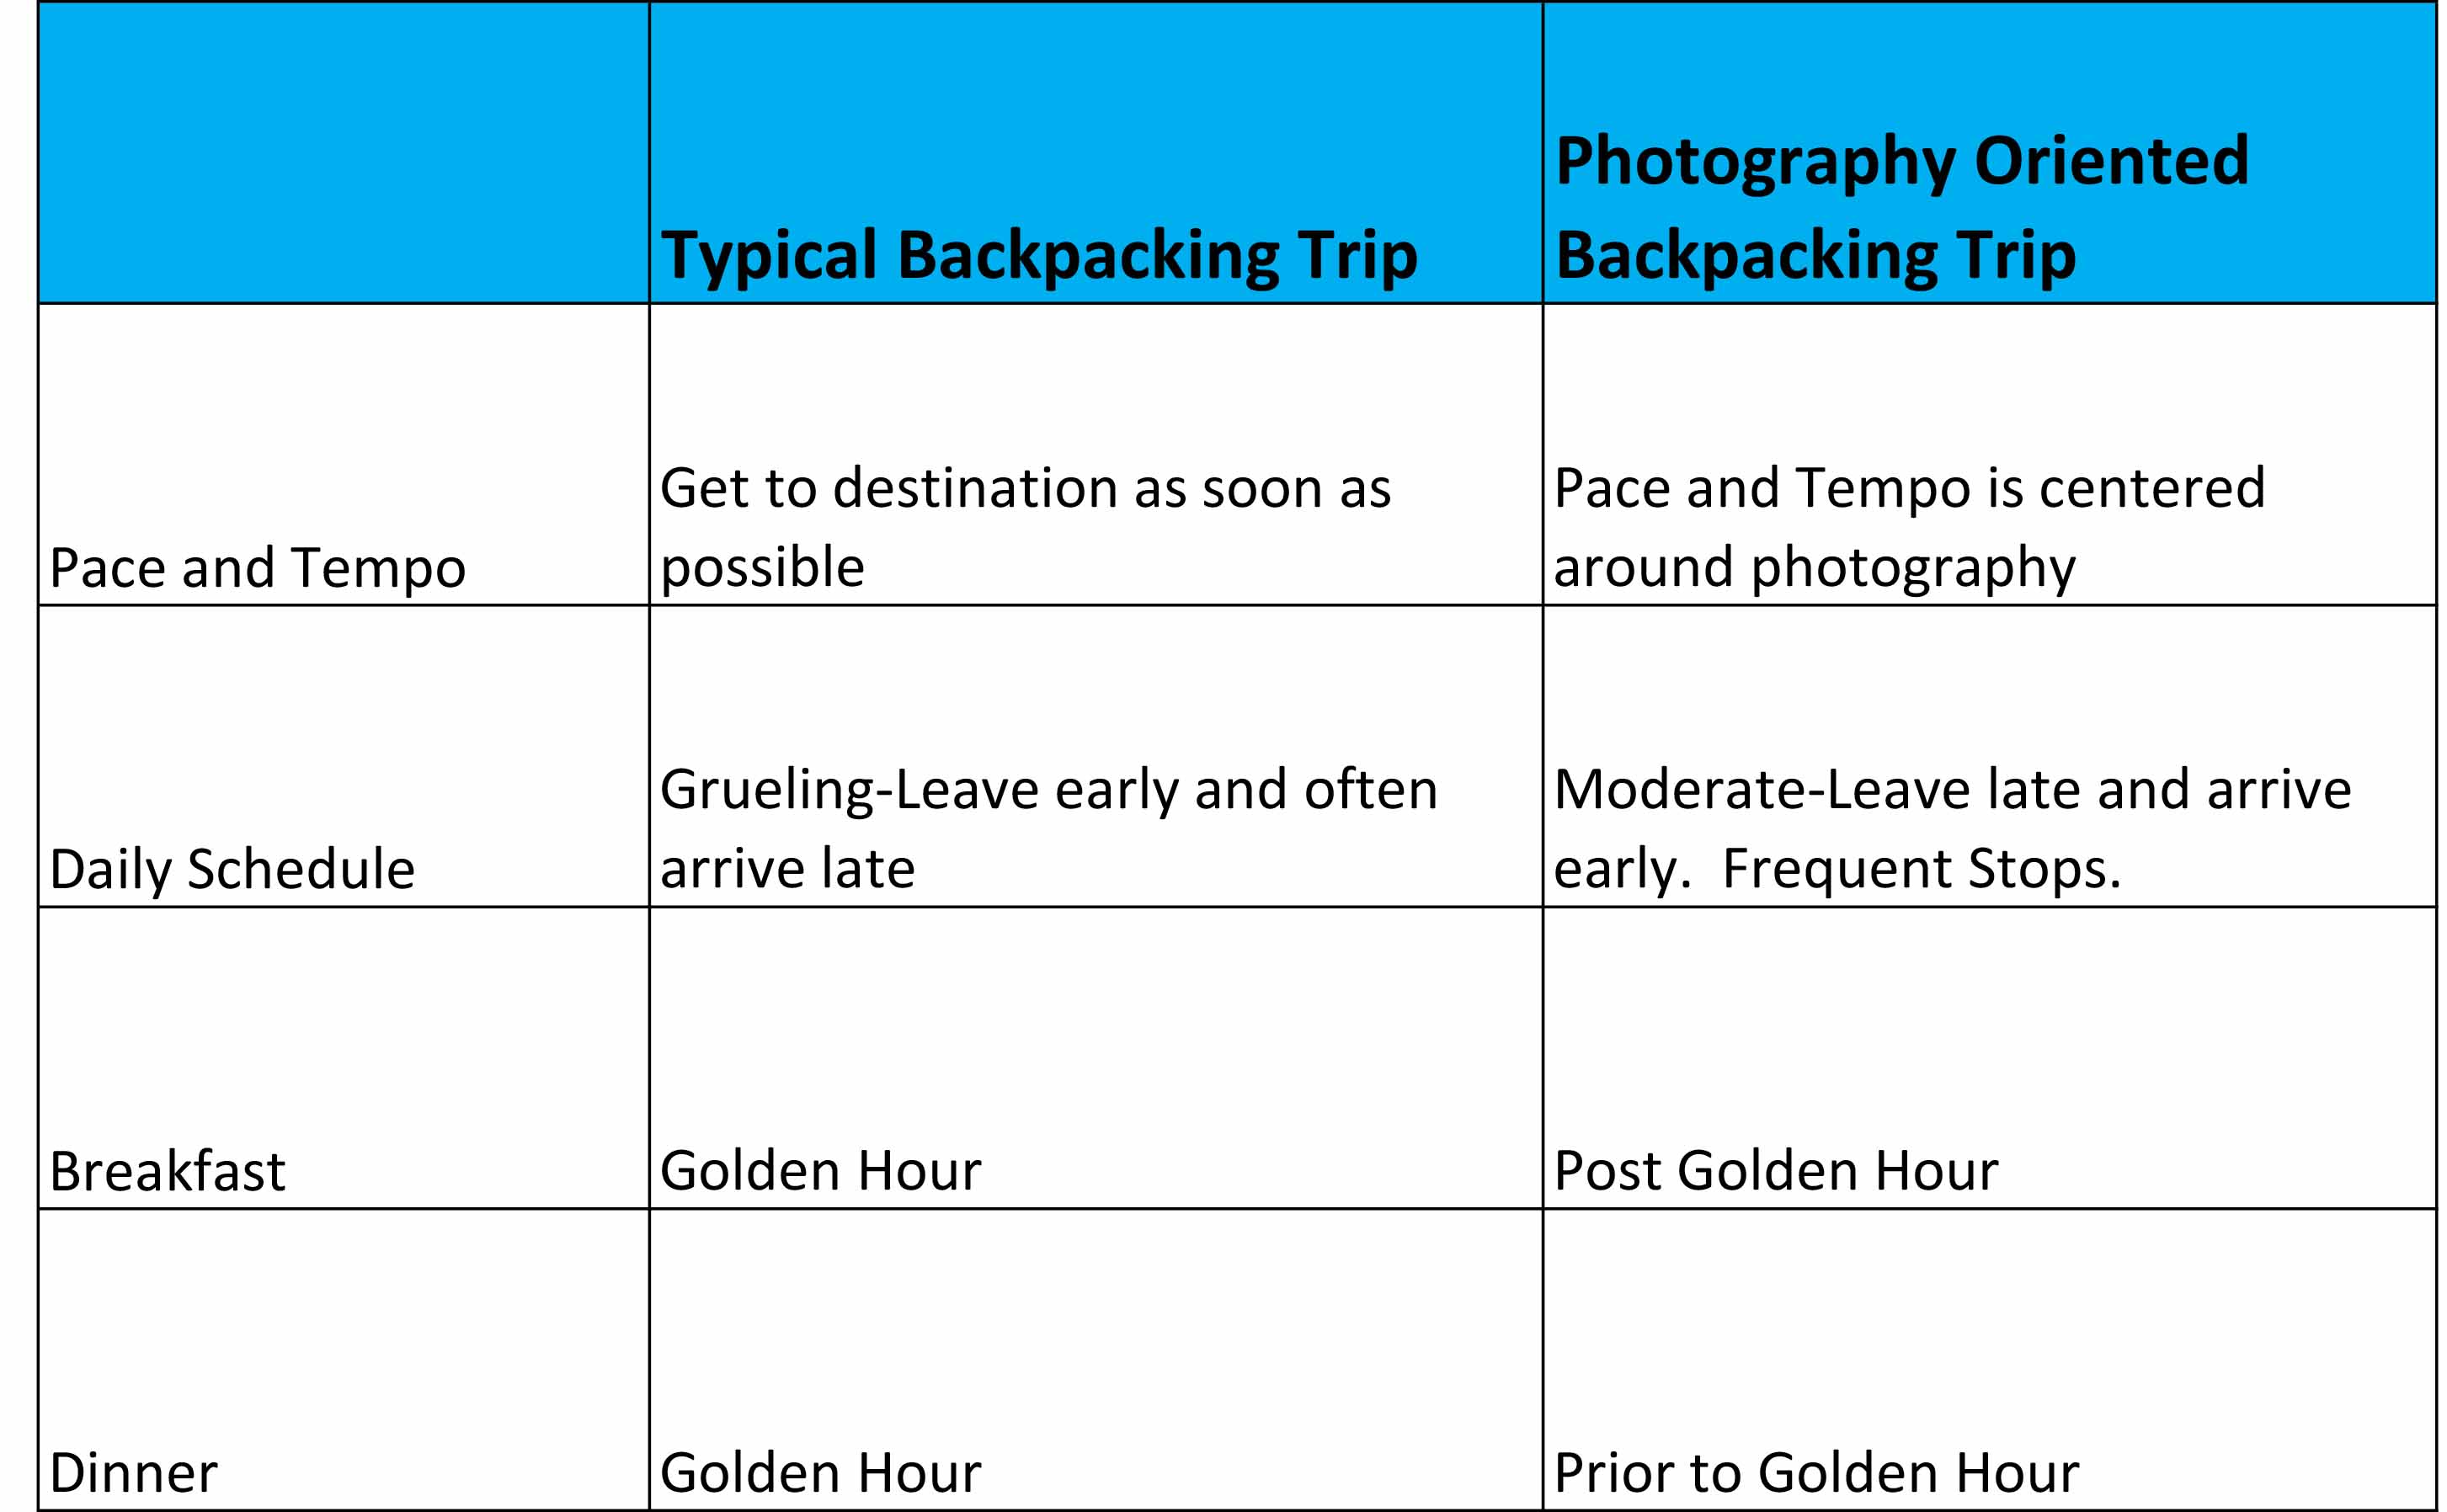 Typical and Photography Multiday Backpacking